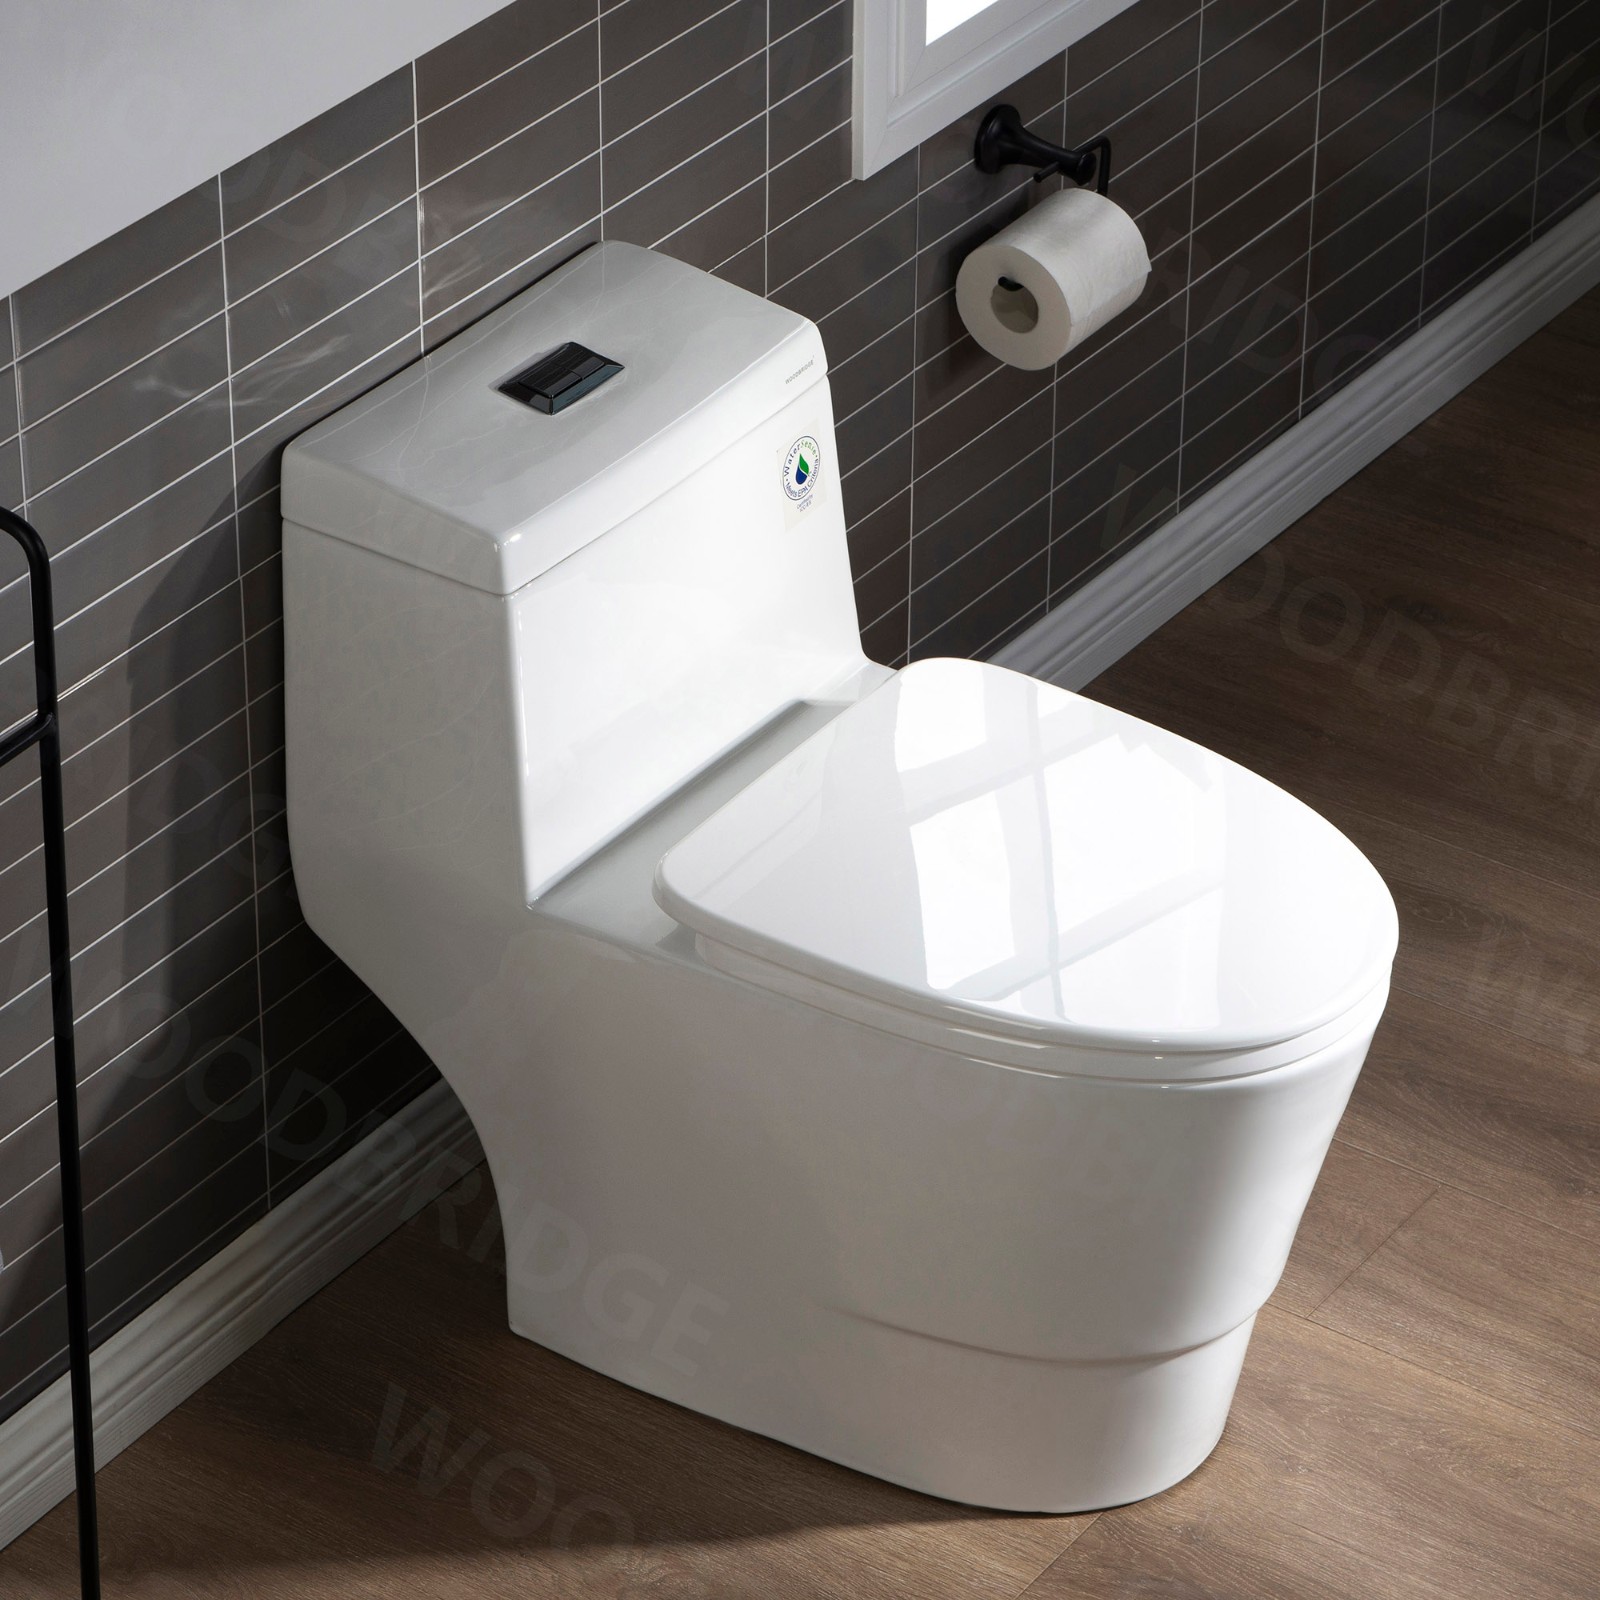  WOODBRIDGEE One Piece Toilet with Soft Closing Seat, Chair Height, 1.28 GPF Dual, Water Sensed, 1000 Gram MaP Flushing Score Toilet with Matte Black Button T0001-MB, White_7664